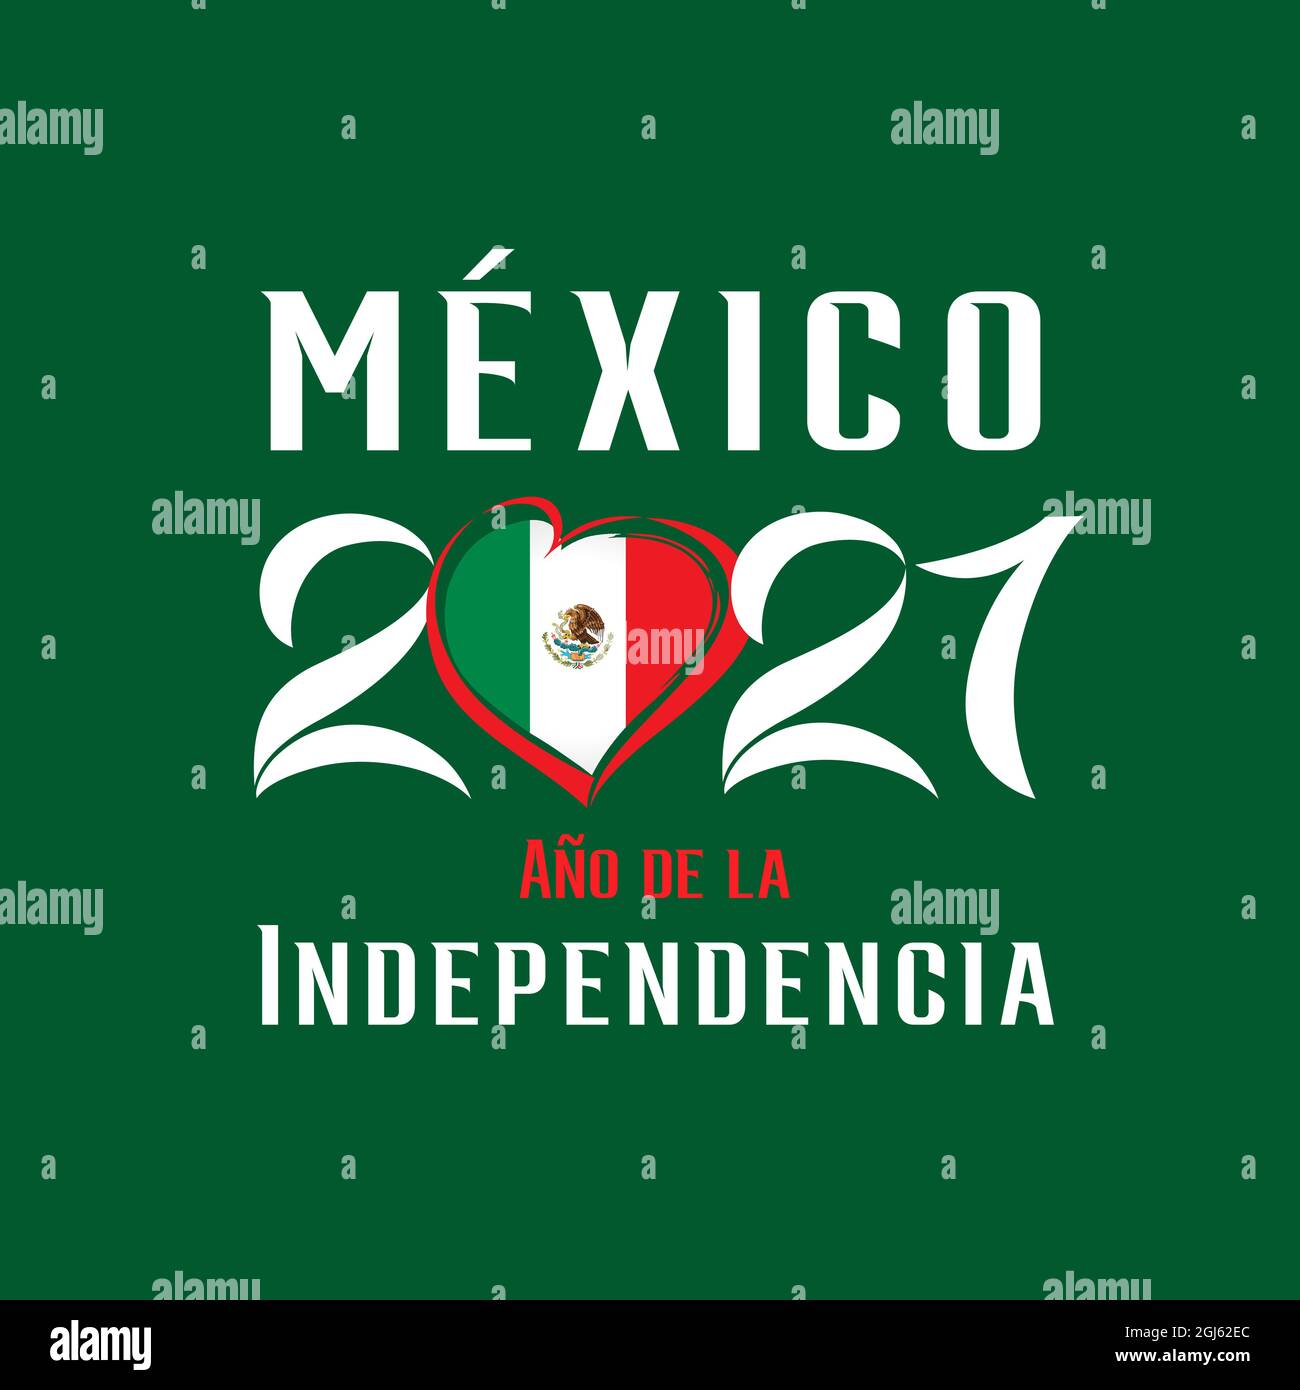 Mexico 2021 Ano de la Independencia green poster. Spanish text - Mexico 2021 year of Independence with heart emblem. The Mexican War of Independence Stock Vector